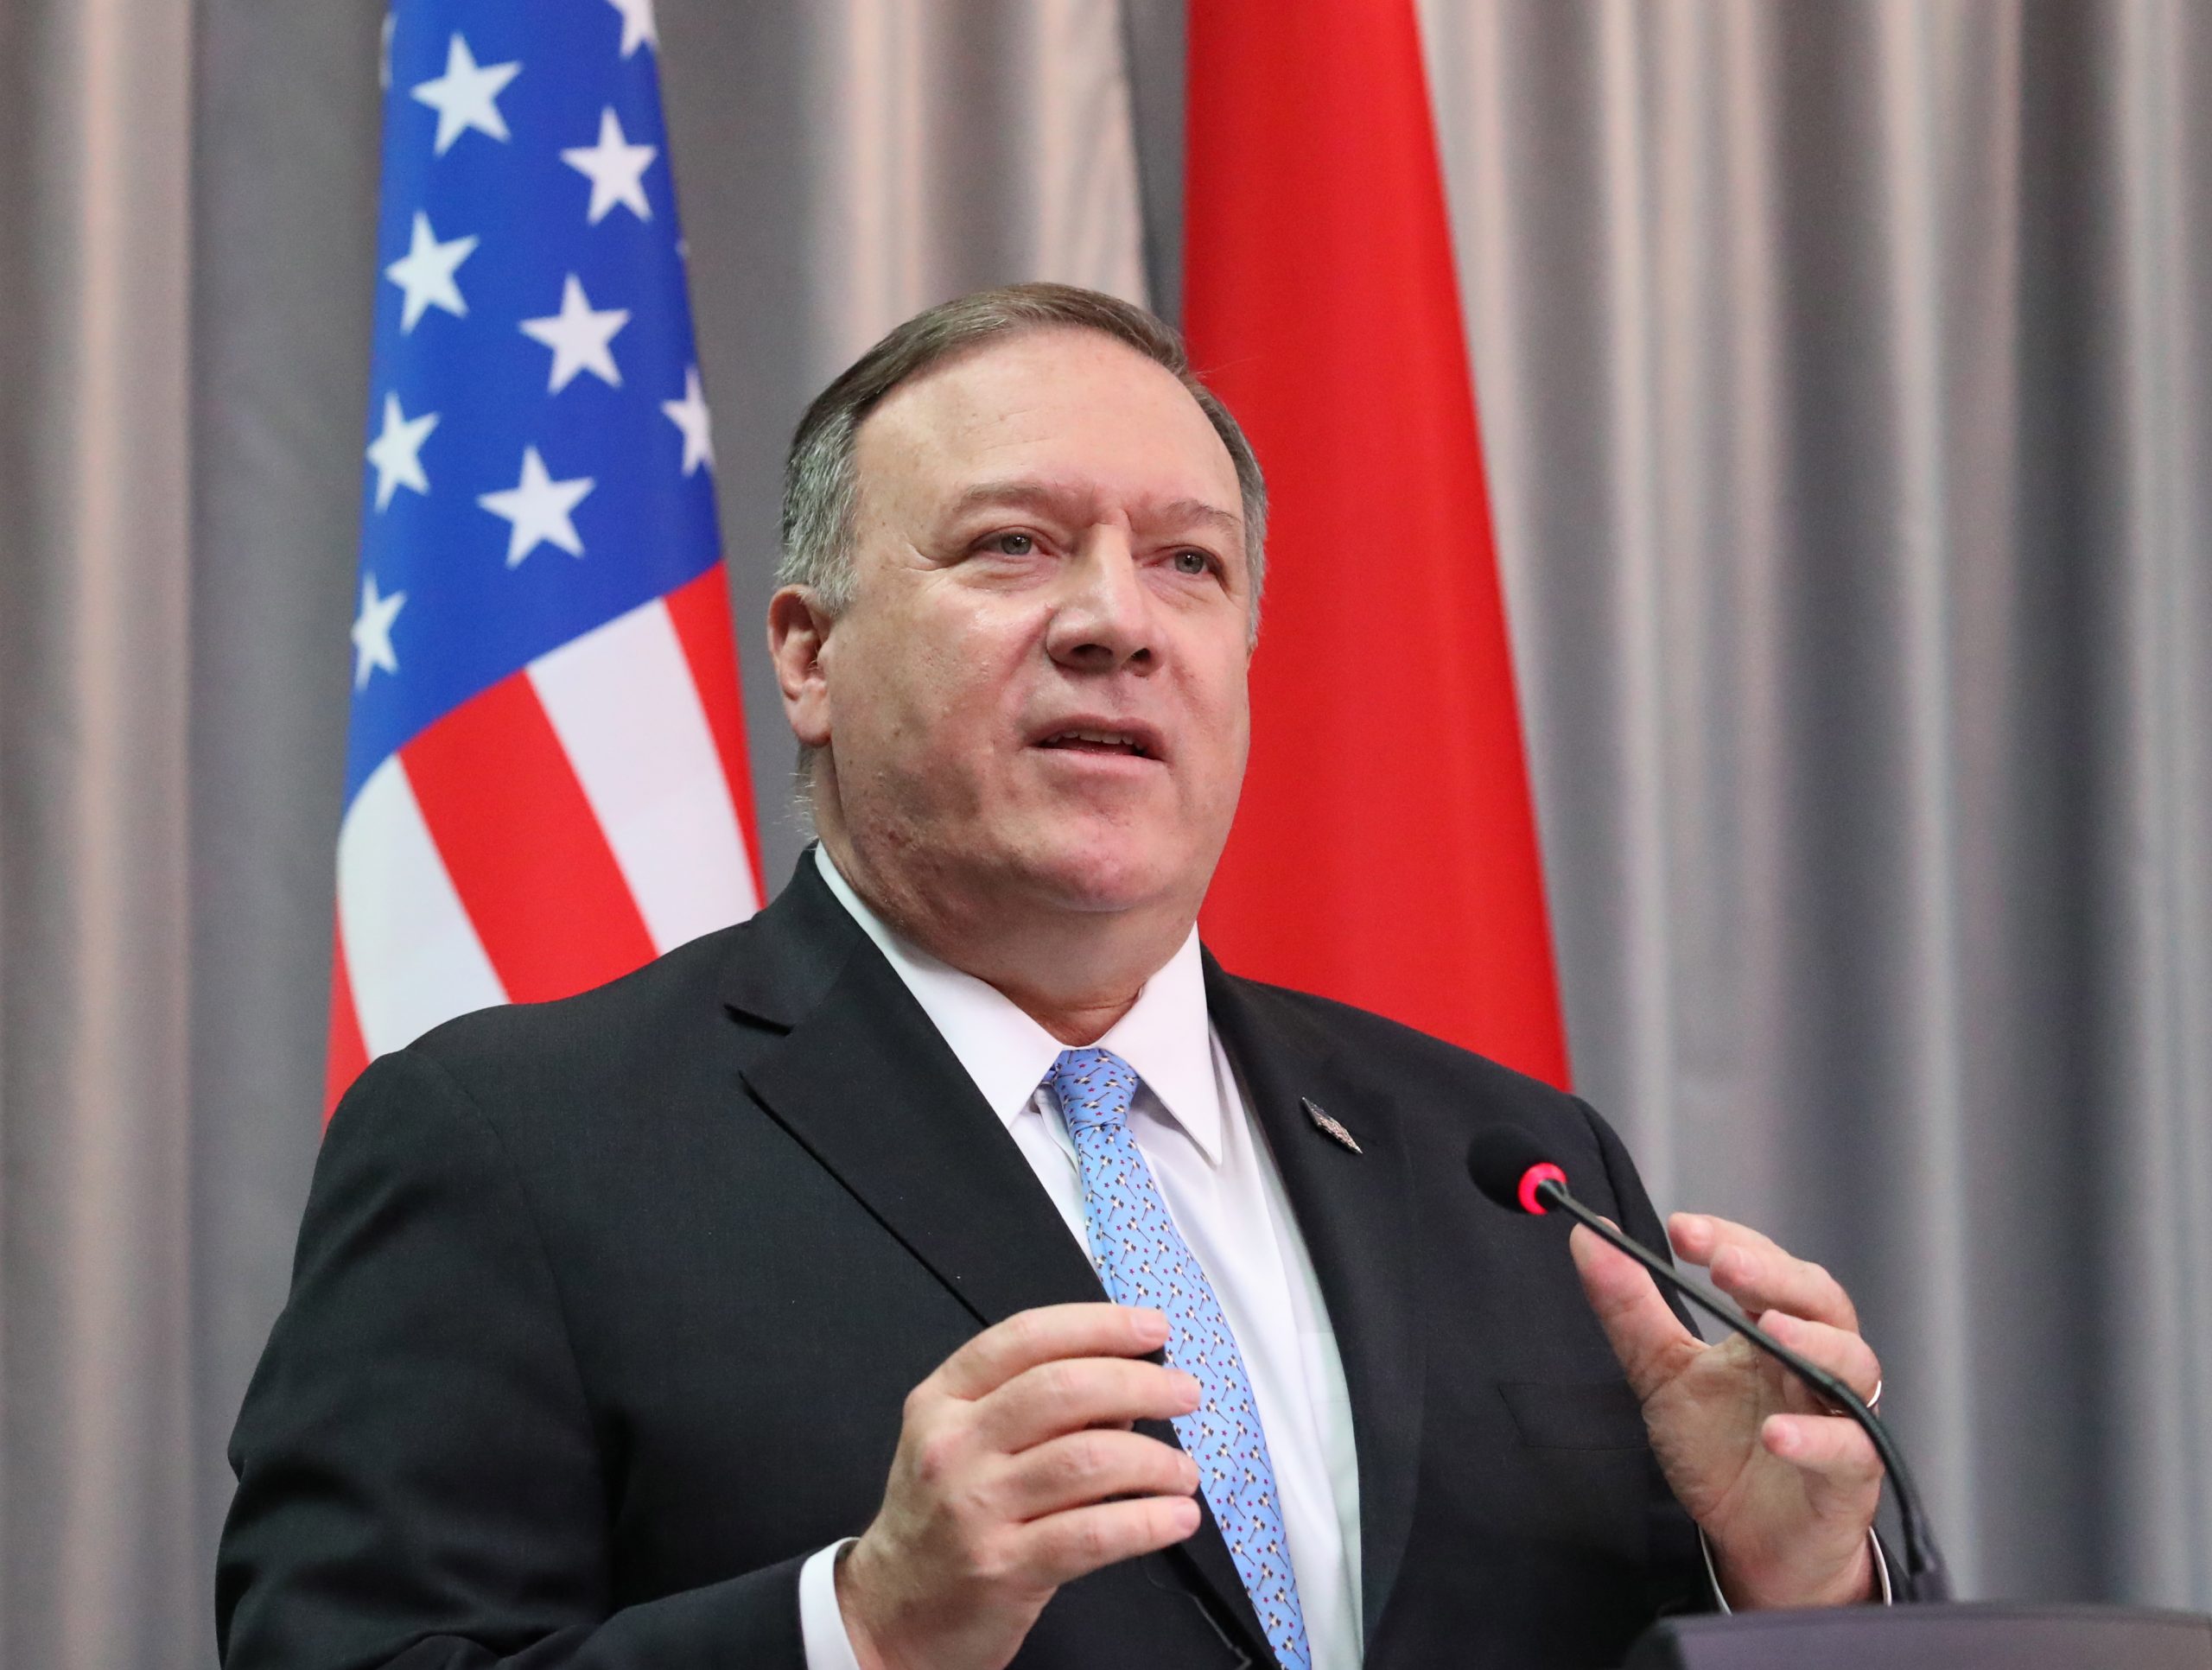 epa08184328 US Secretary of State Mike Pompeo talks to media at the Palace of Independence in Minsk, Belarus, 01 February 2020. Pompeo is on an official visit to Belarus.  EPA/TATYANA ZENKOVICH